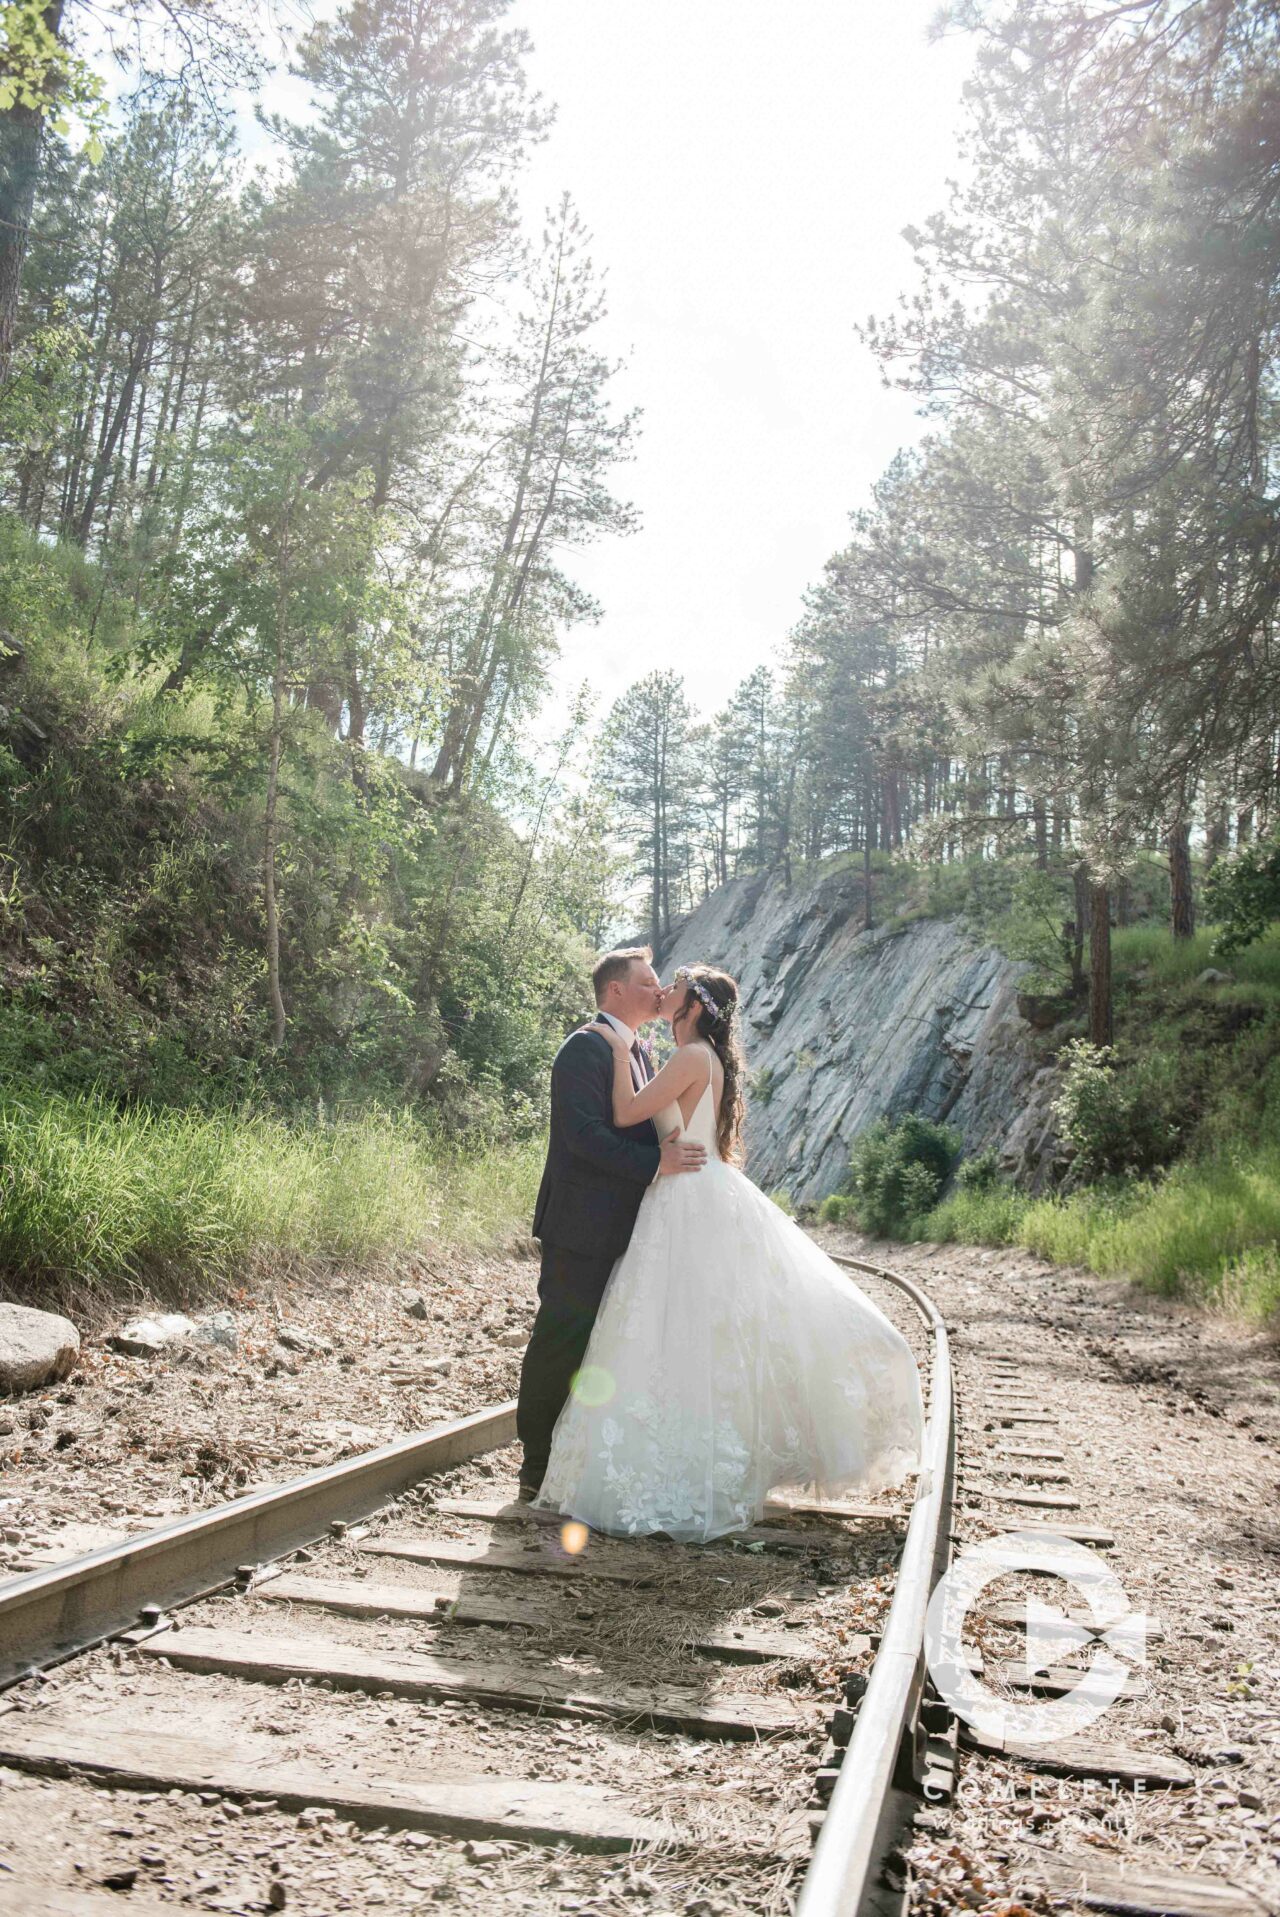 Iconic Wedding Photo Spots in the Black Hills